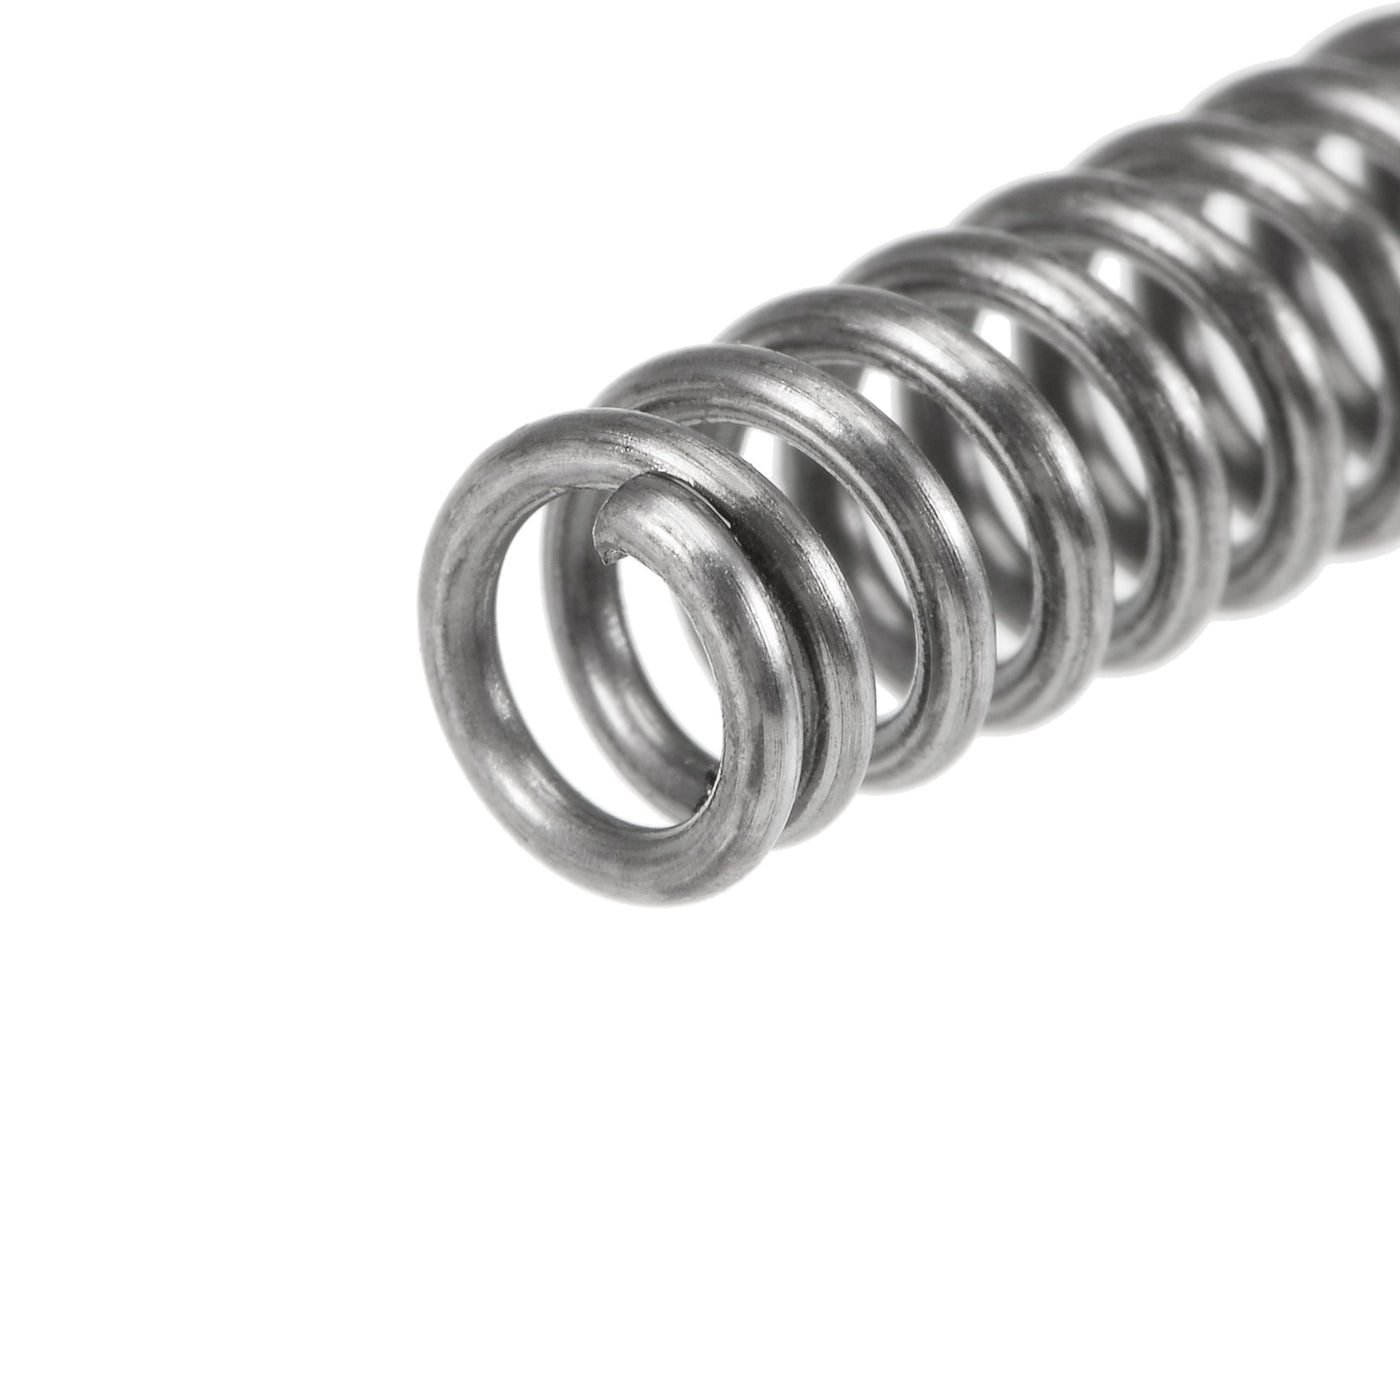 uxcell Uxcell Compressed Spring,5mmx0.8mmx20mm Free Length,35.3N Load Capacity,Gray,10pcs